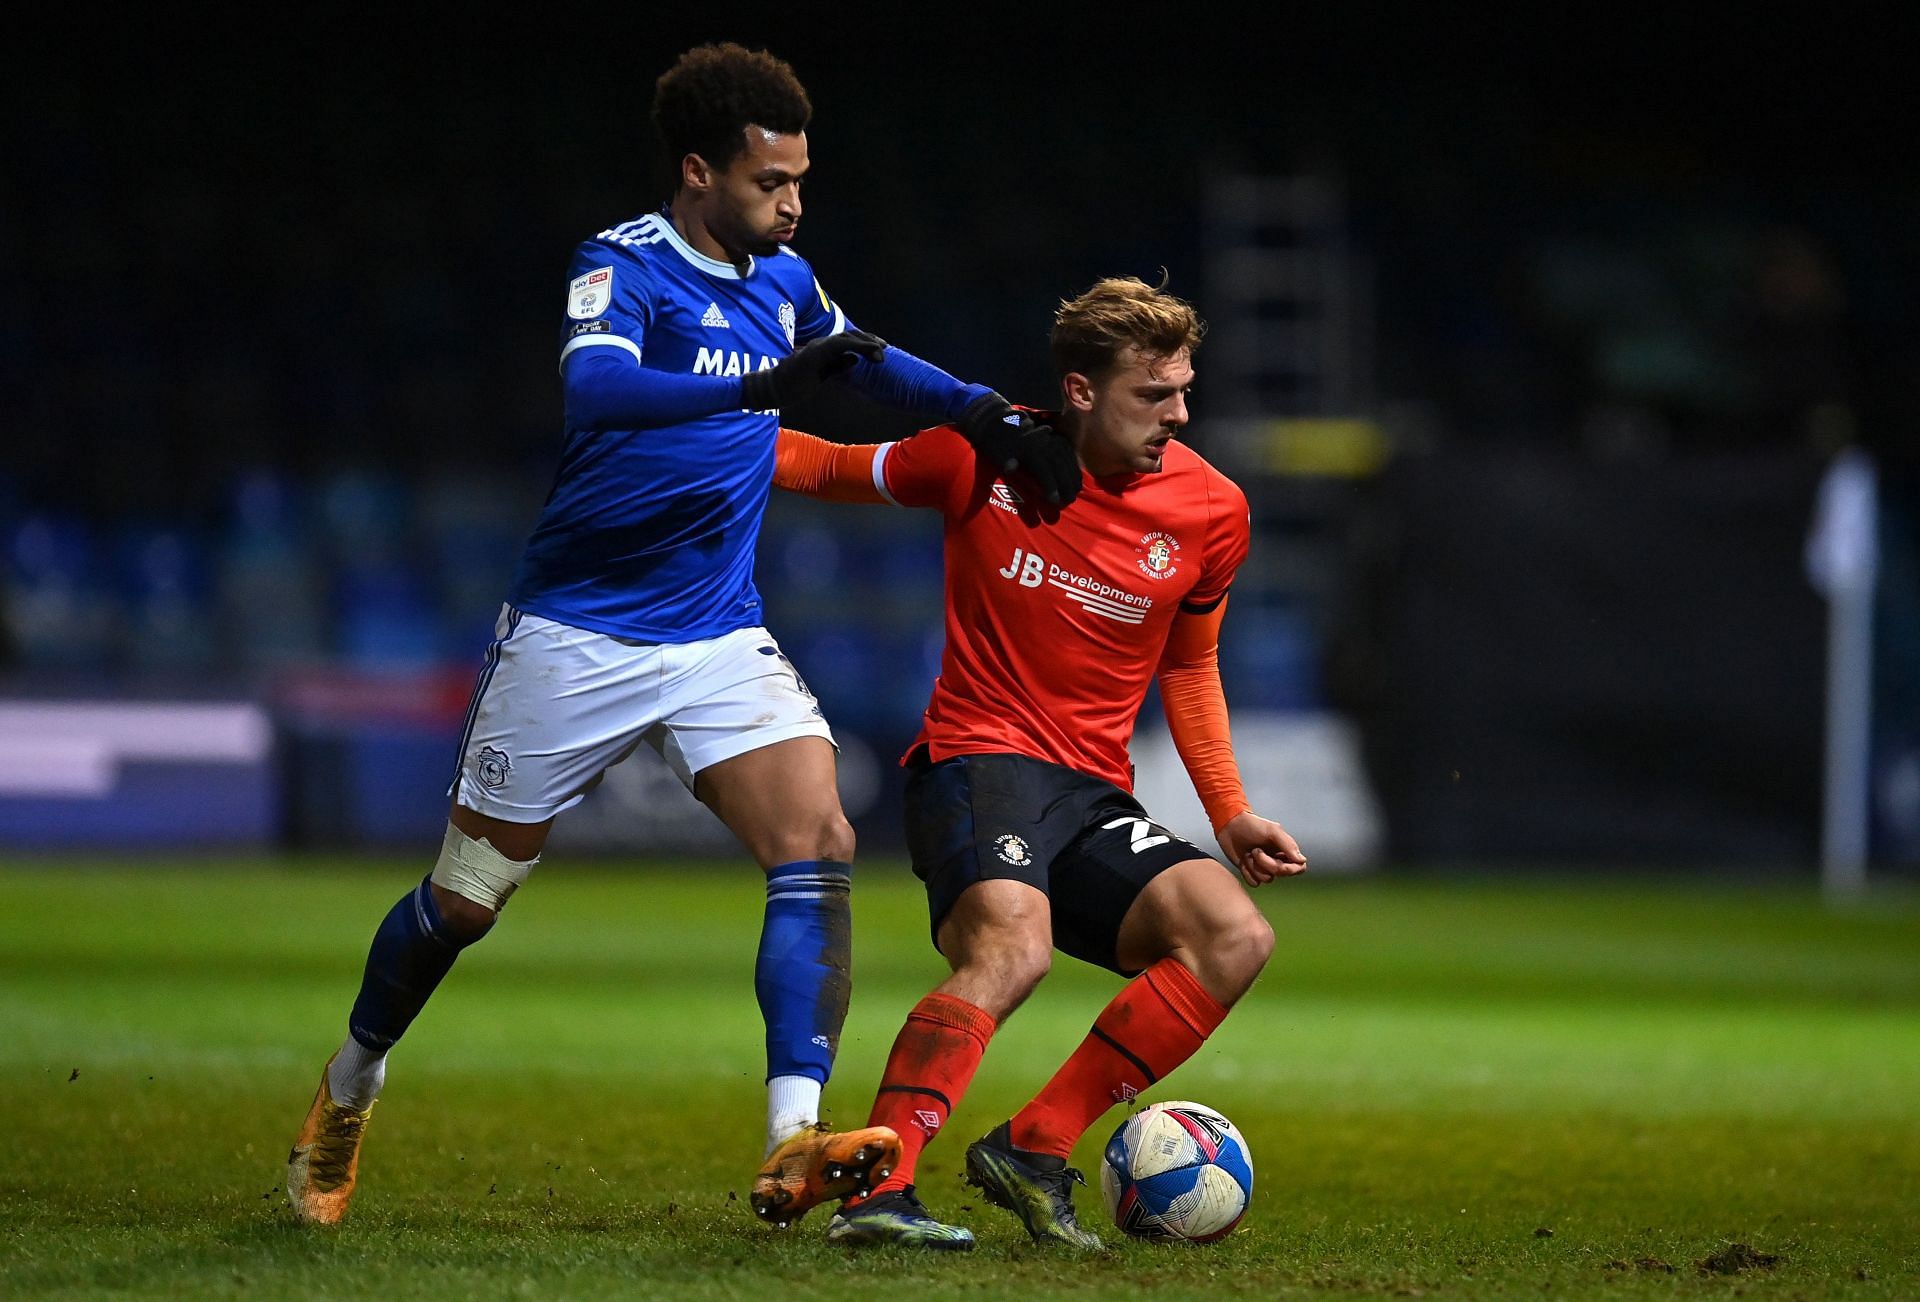 Luton Town face Cardiff City on Monday